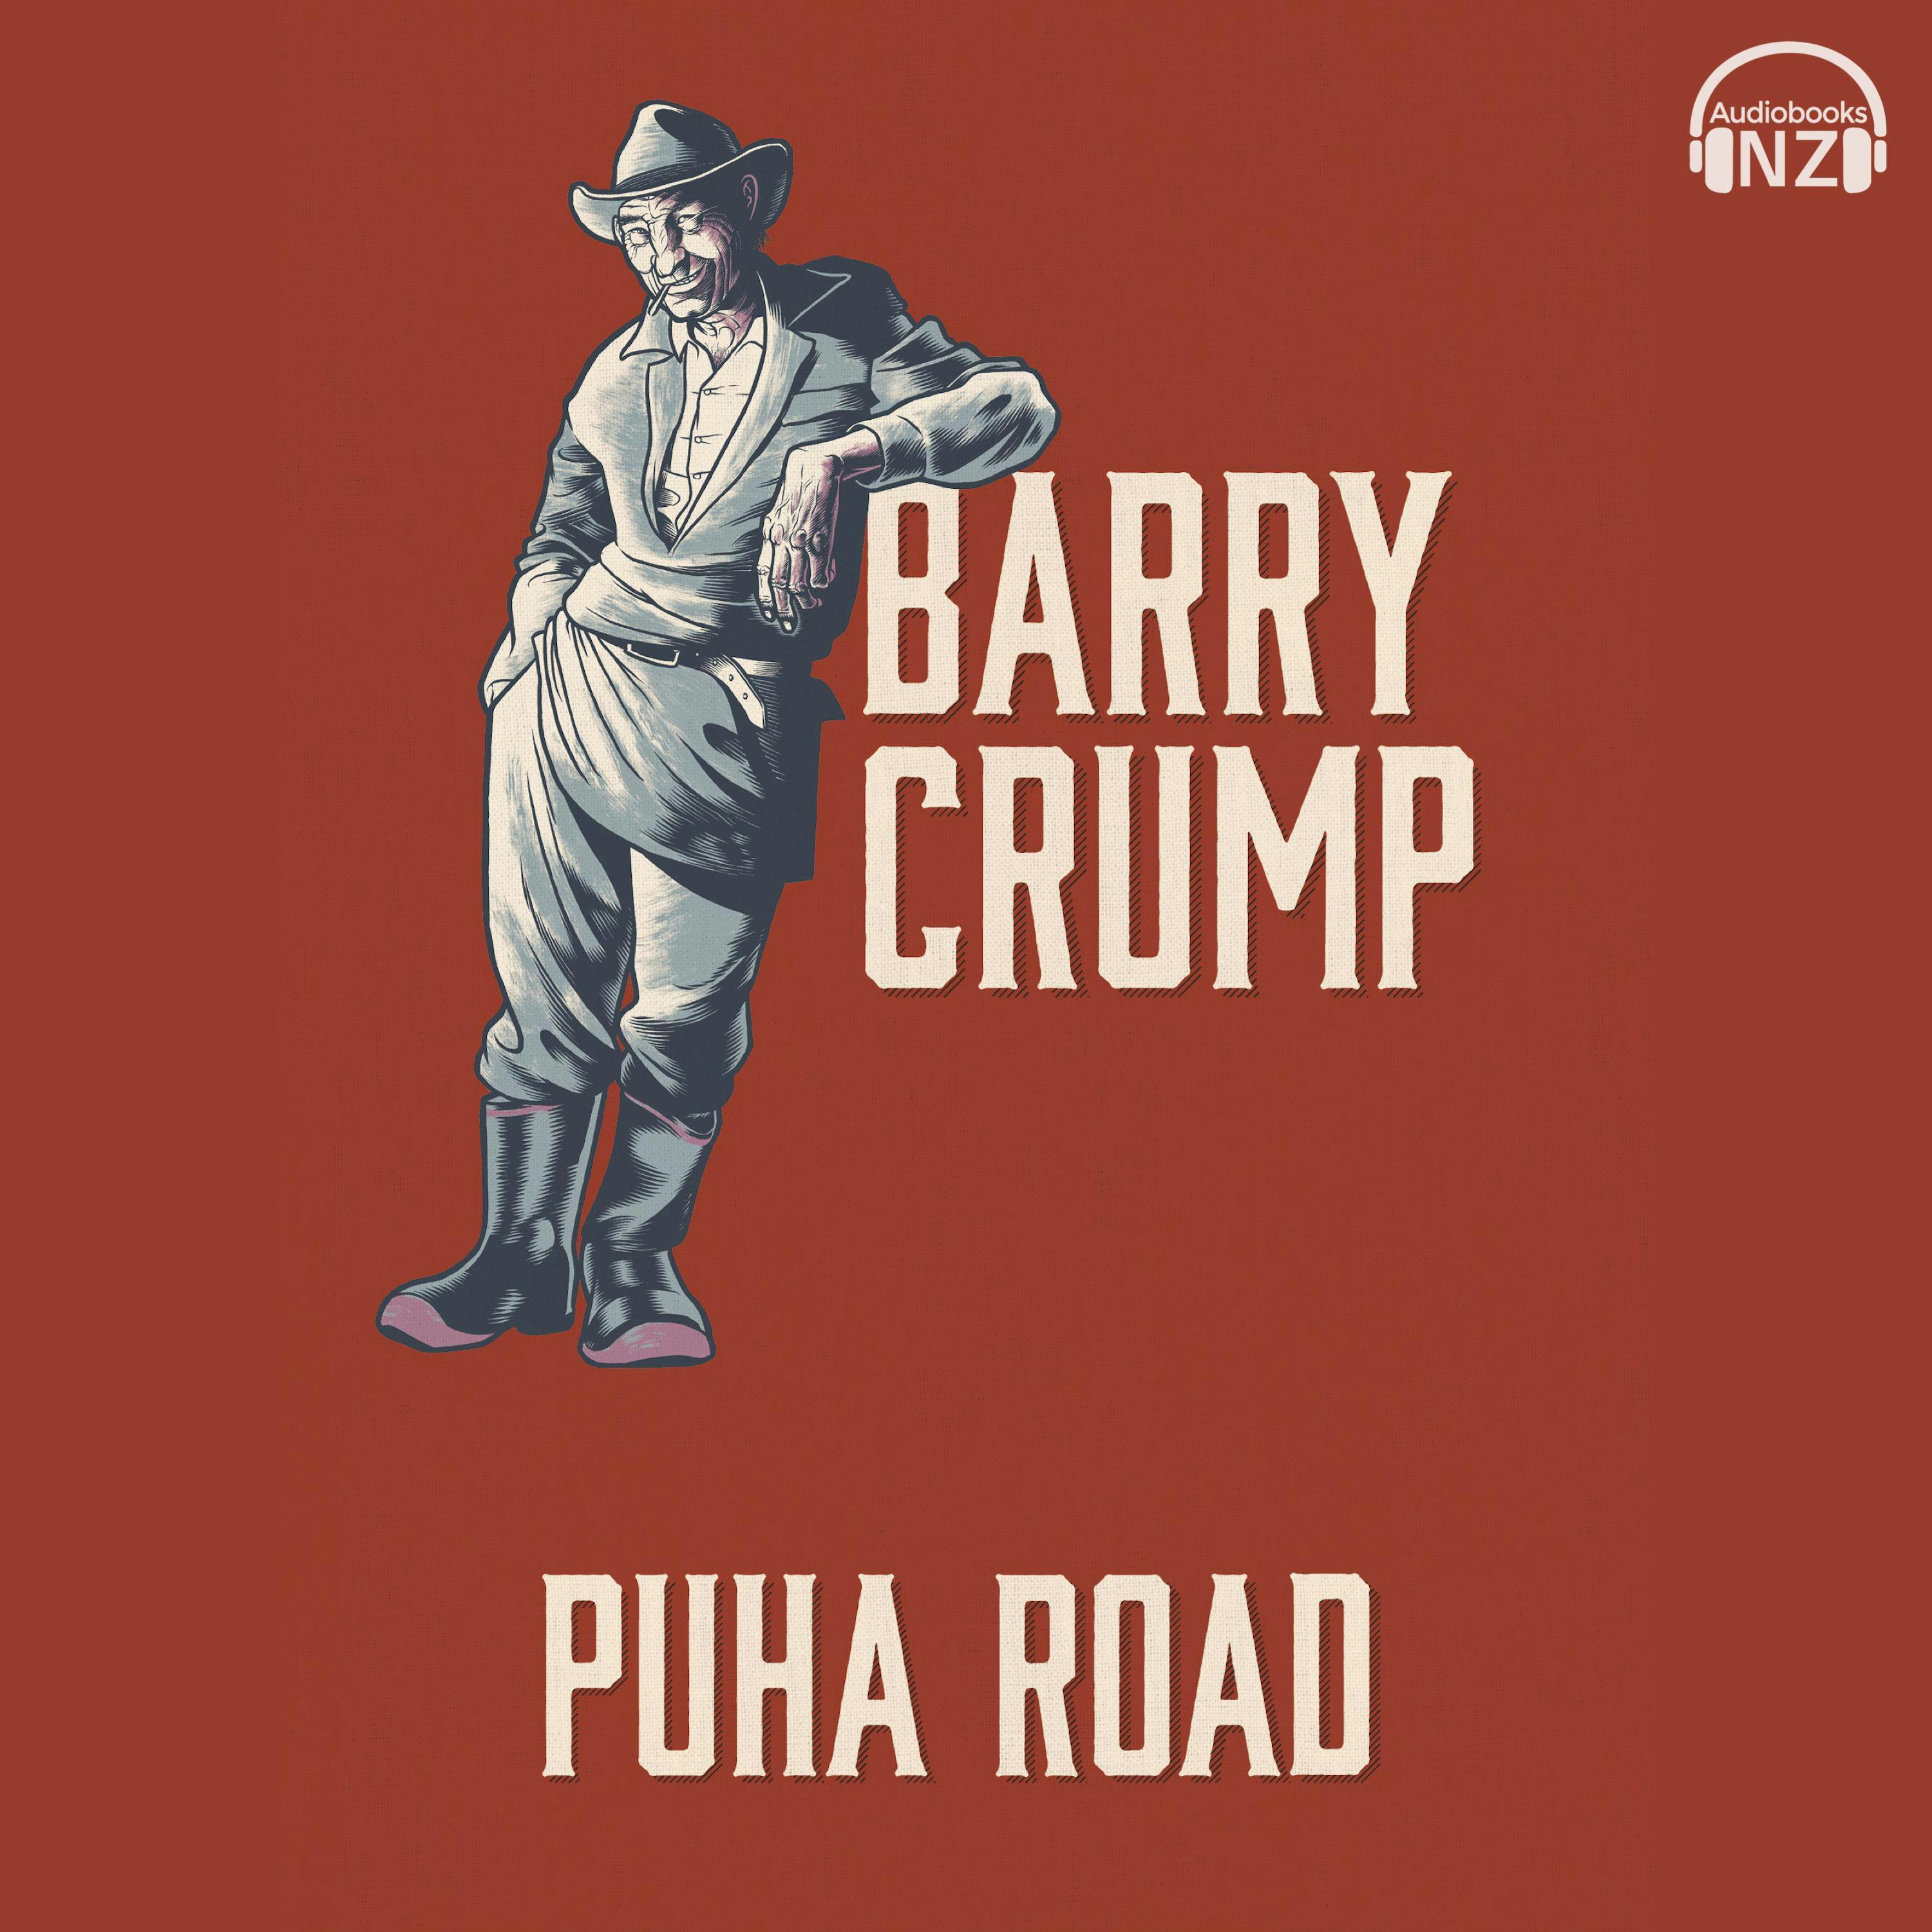 Puha Road: Barry Crump Collected Stories Book 5 - Barry Crump